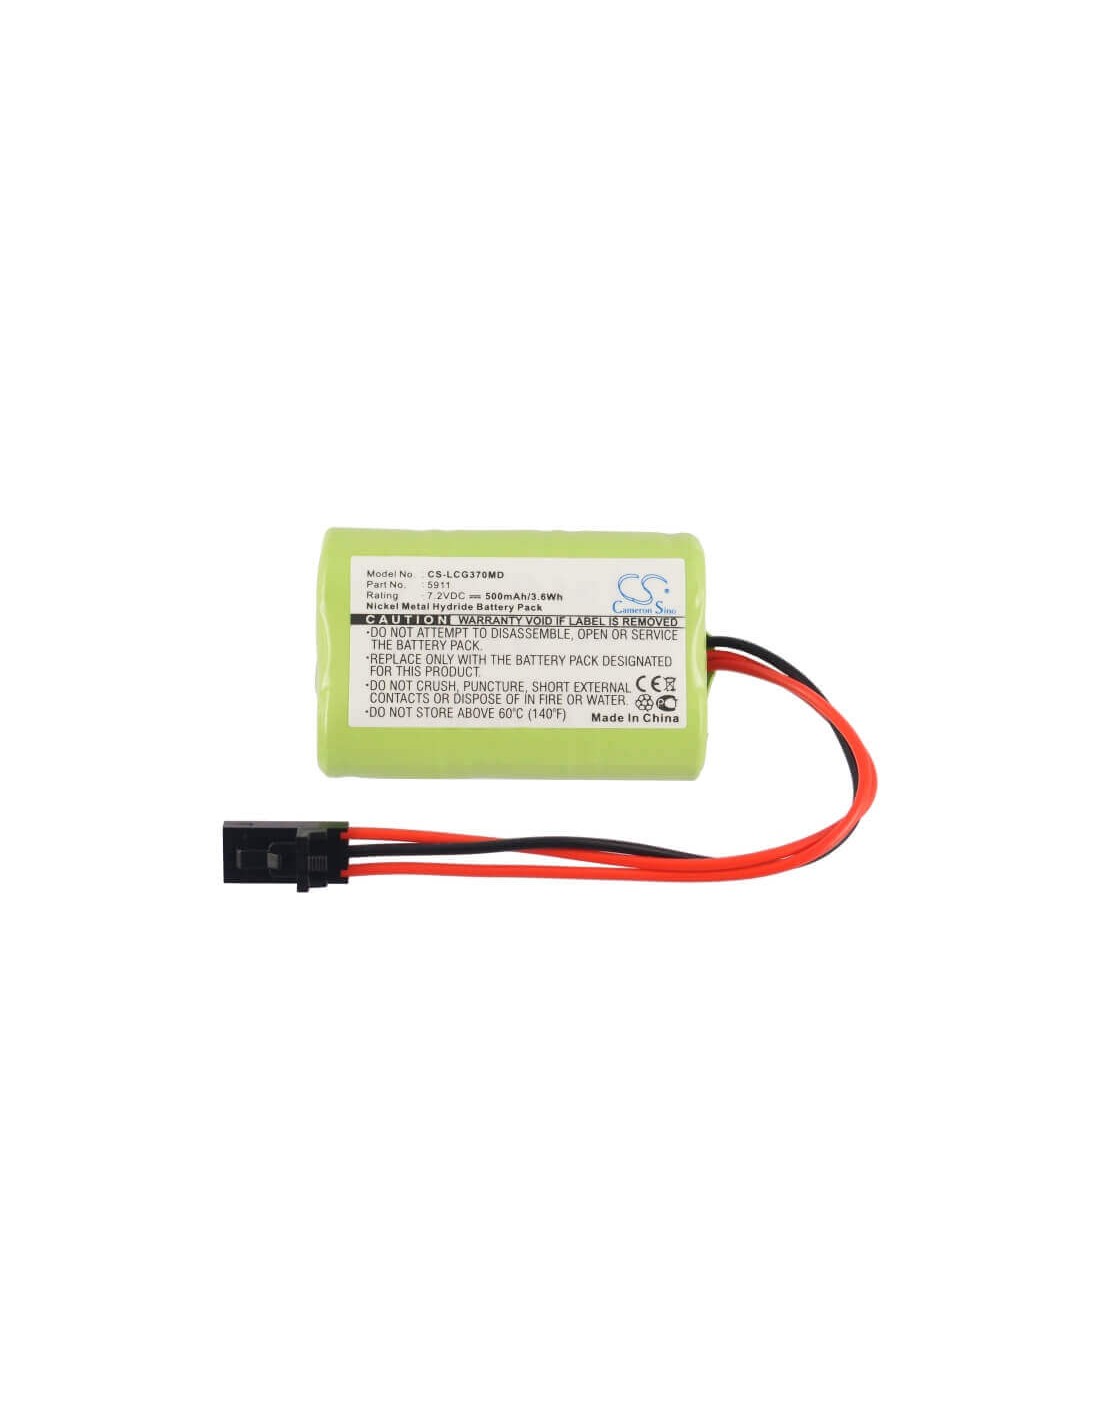 Battery for Lucas-grayson Odiometer Gsi 37, Odiometer Gsi37 7.2V, 500mAh - 3.60Wh